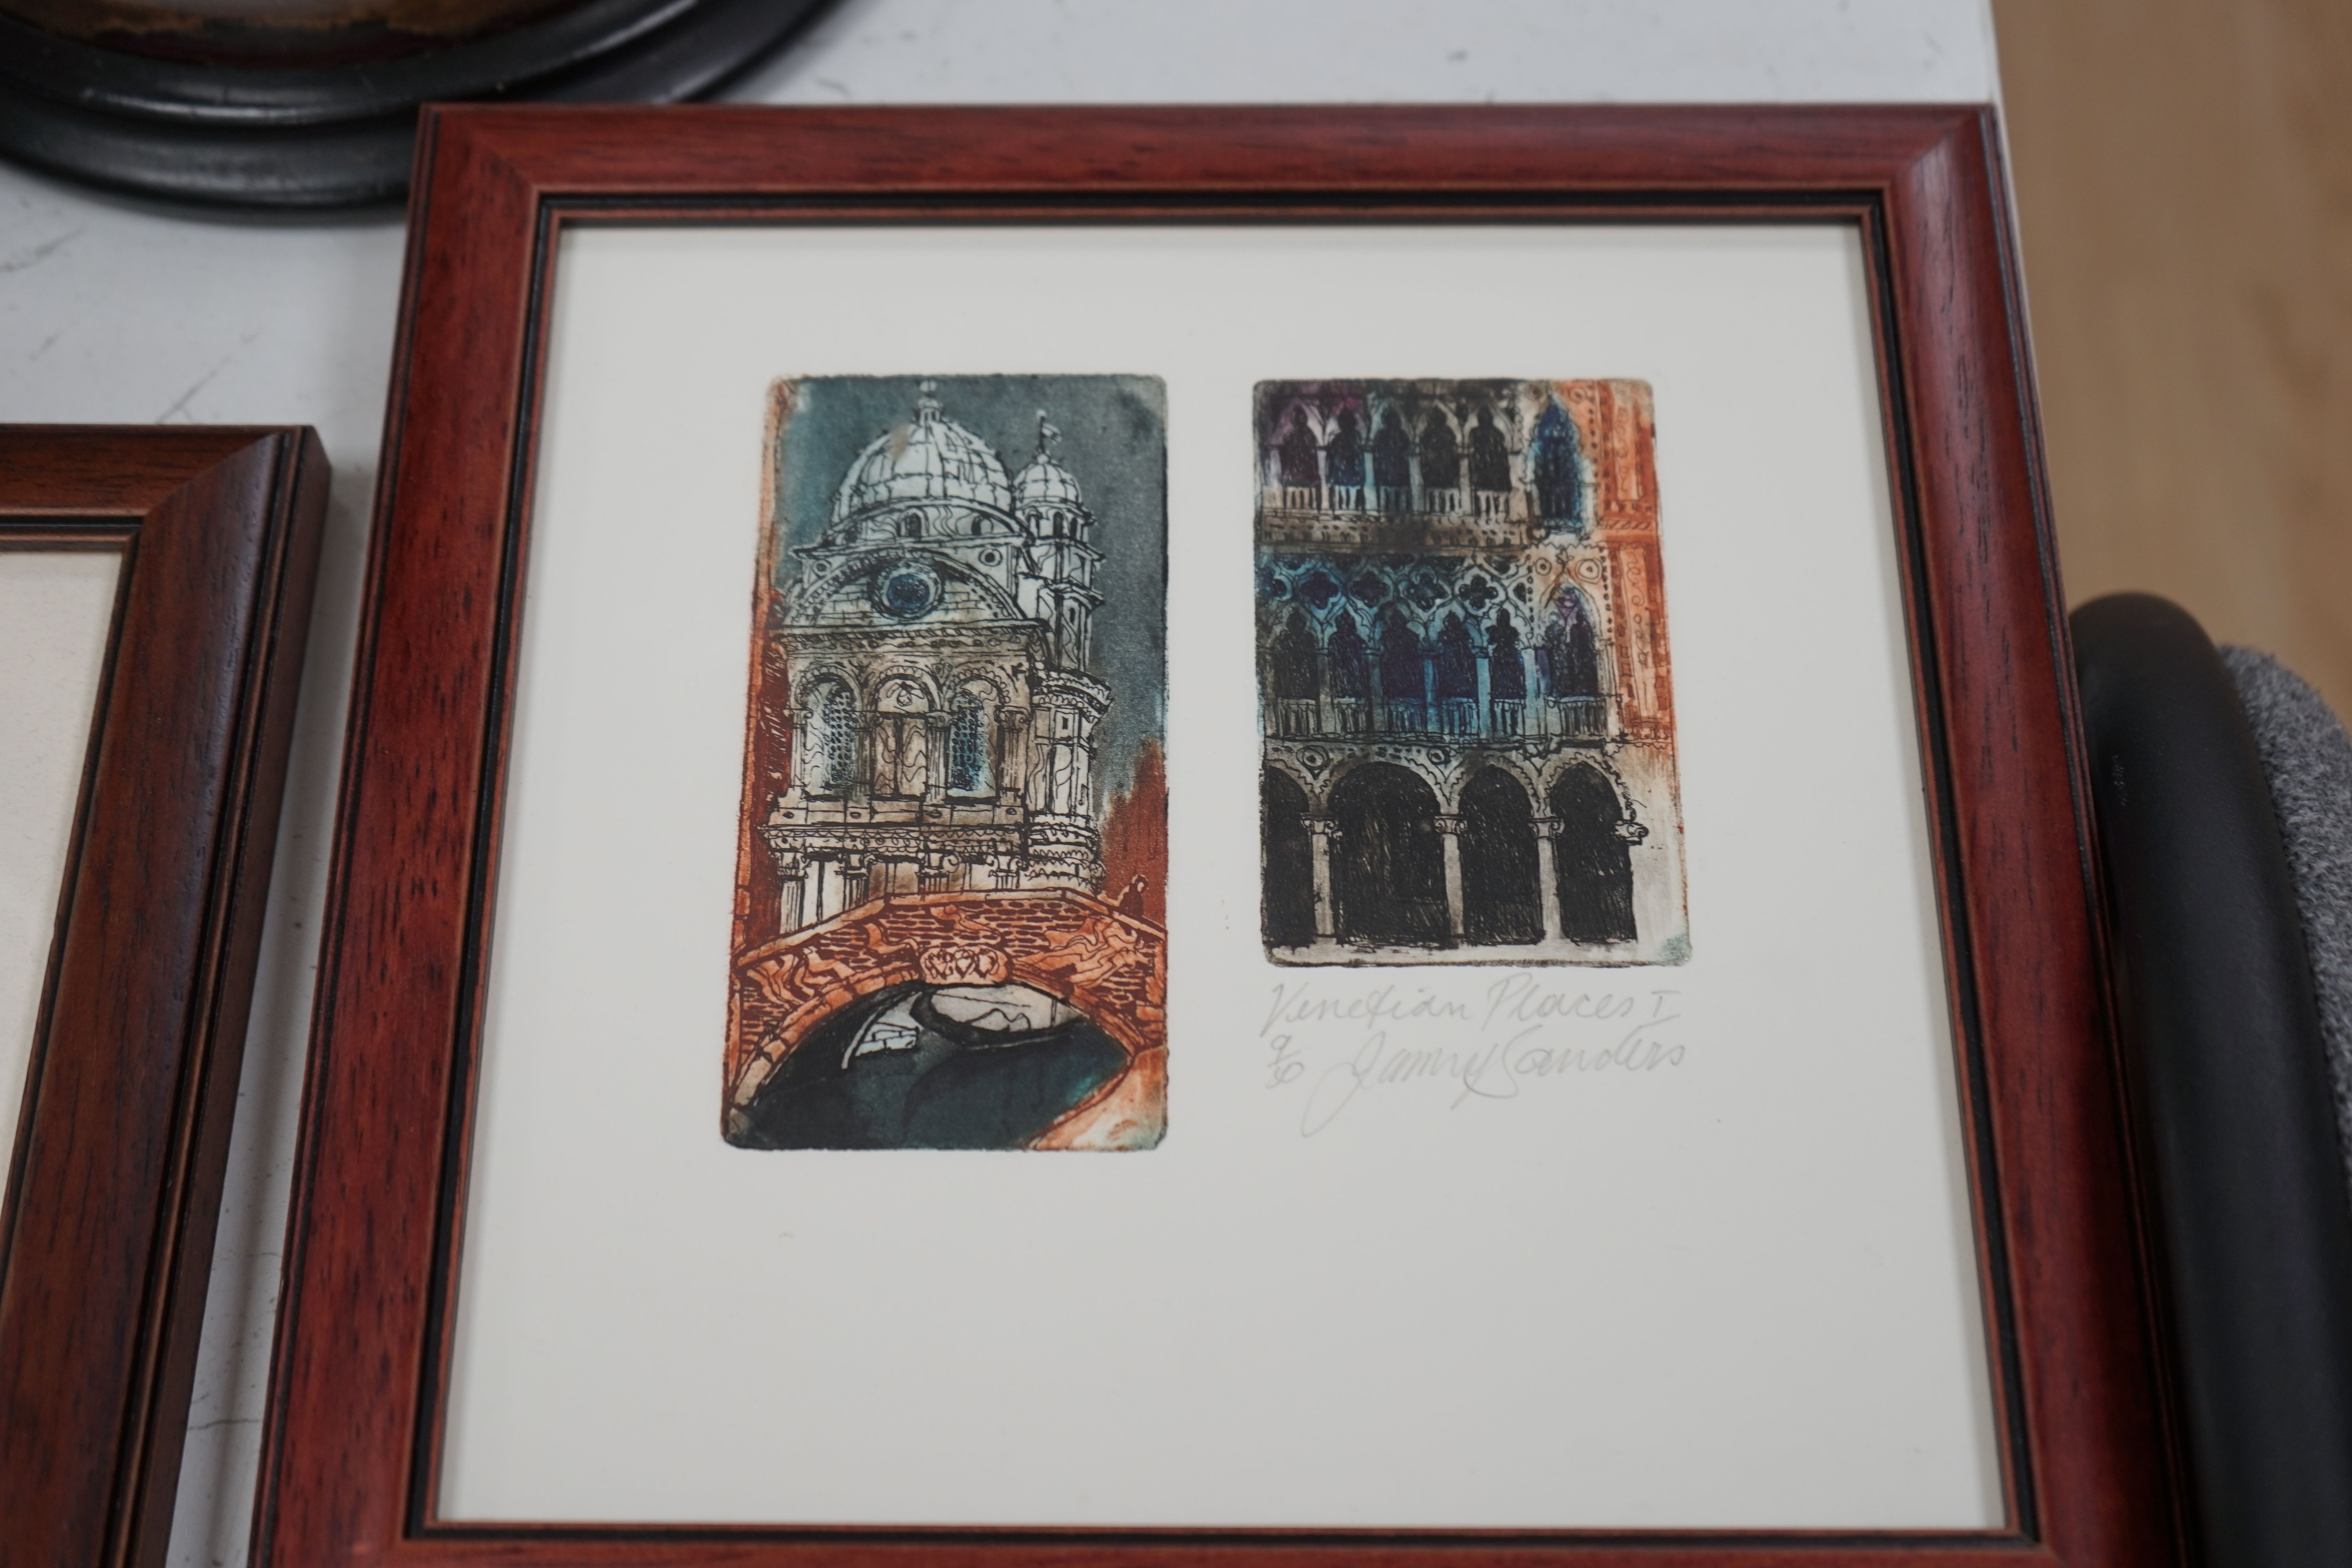 Jenny Sanders, four colour etchings, Venetian scenes including ‘Santa Maria Dei Miracoli’ and ‘View from the Bavolo’, three pencil signed and limited edition, largest 52 x 40cm. Condition - good